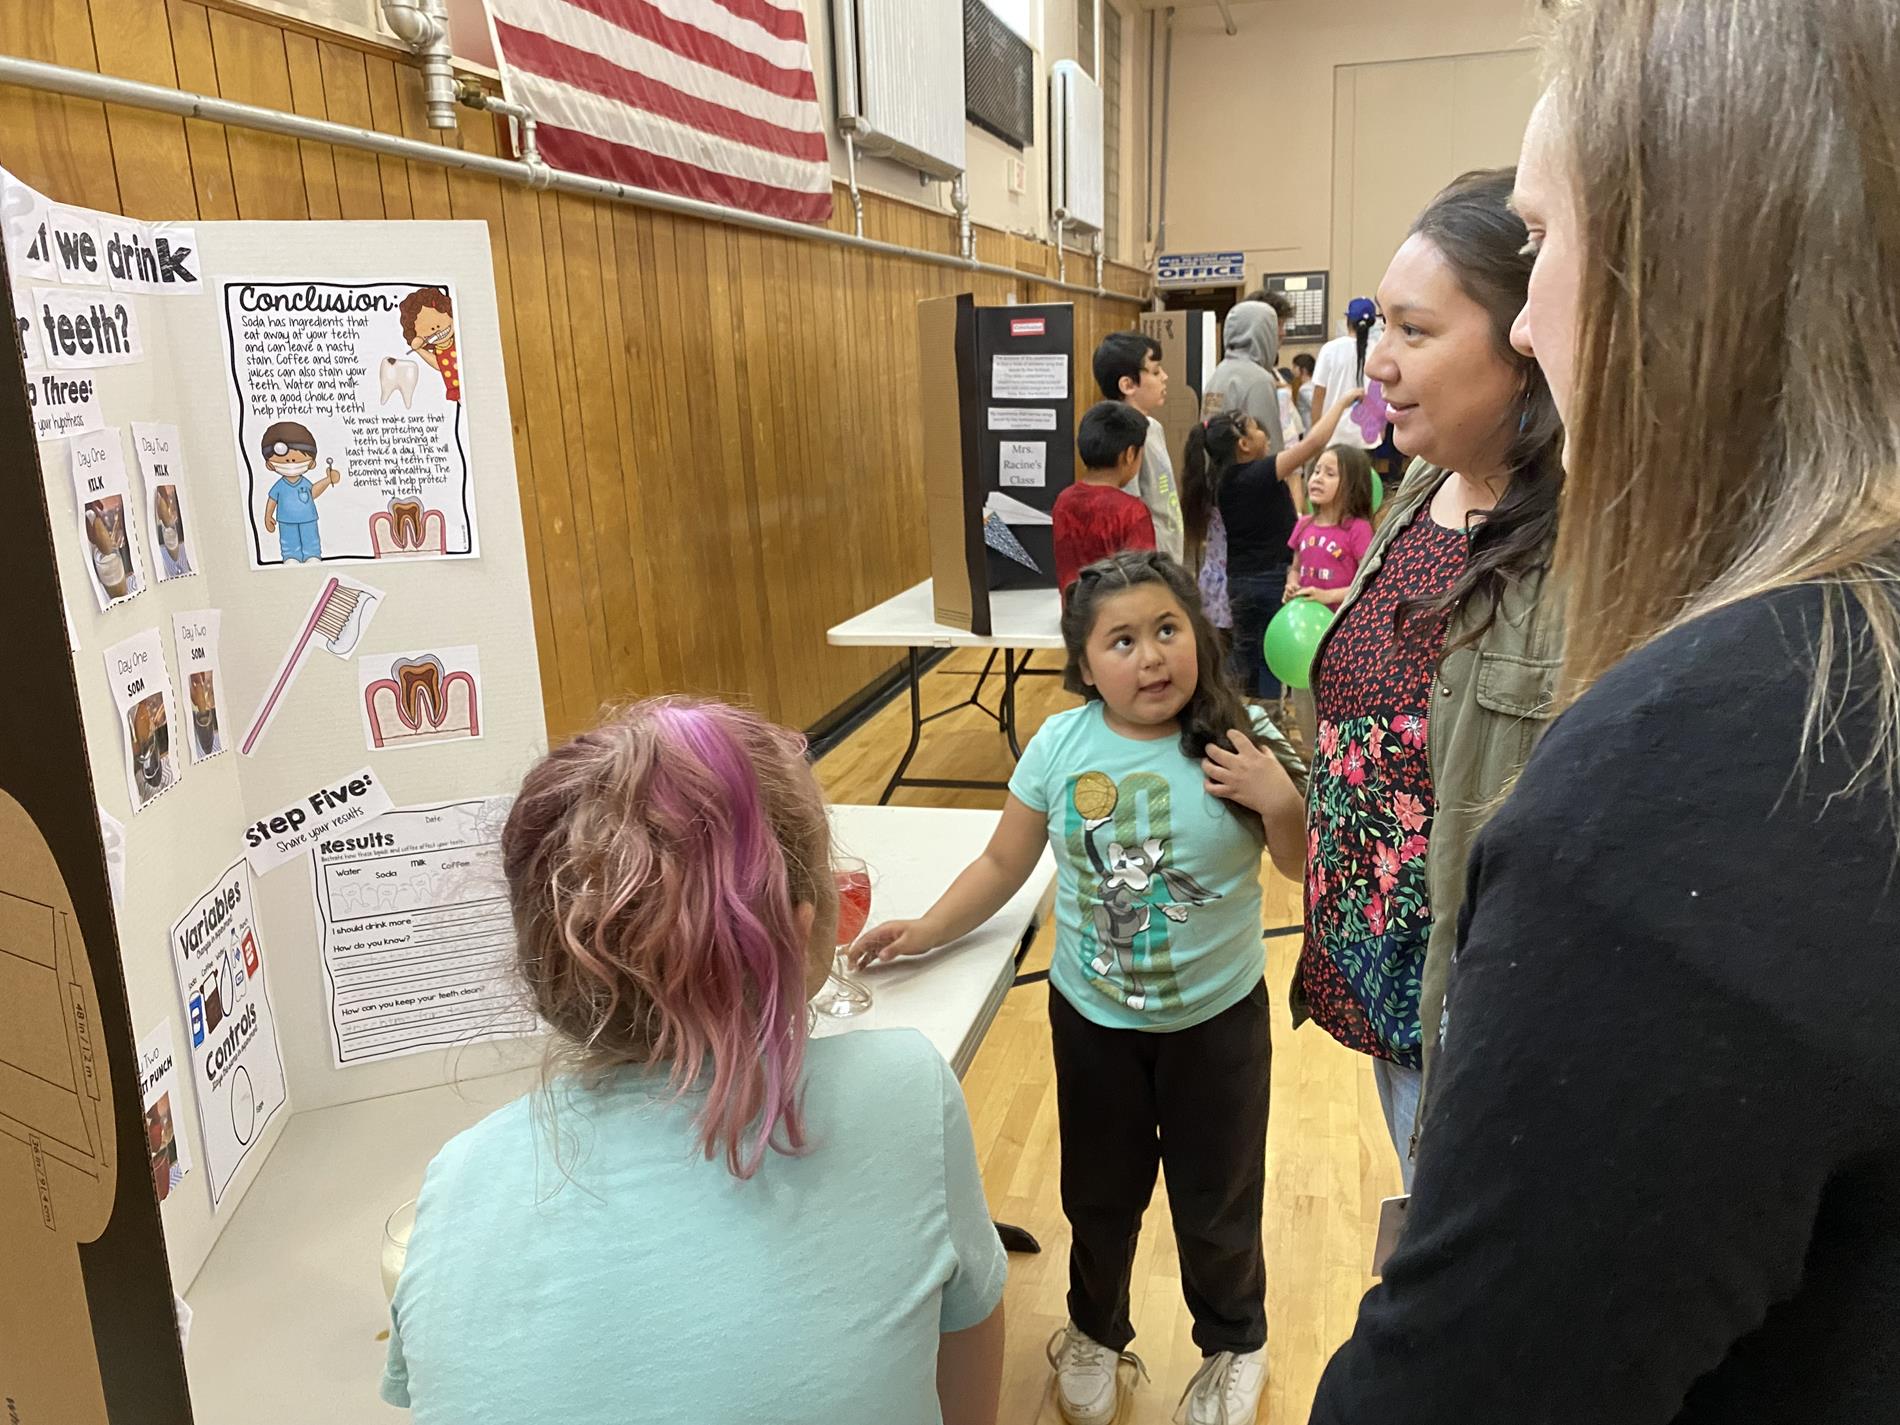 Students Participate in Science Fair